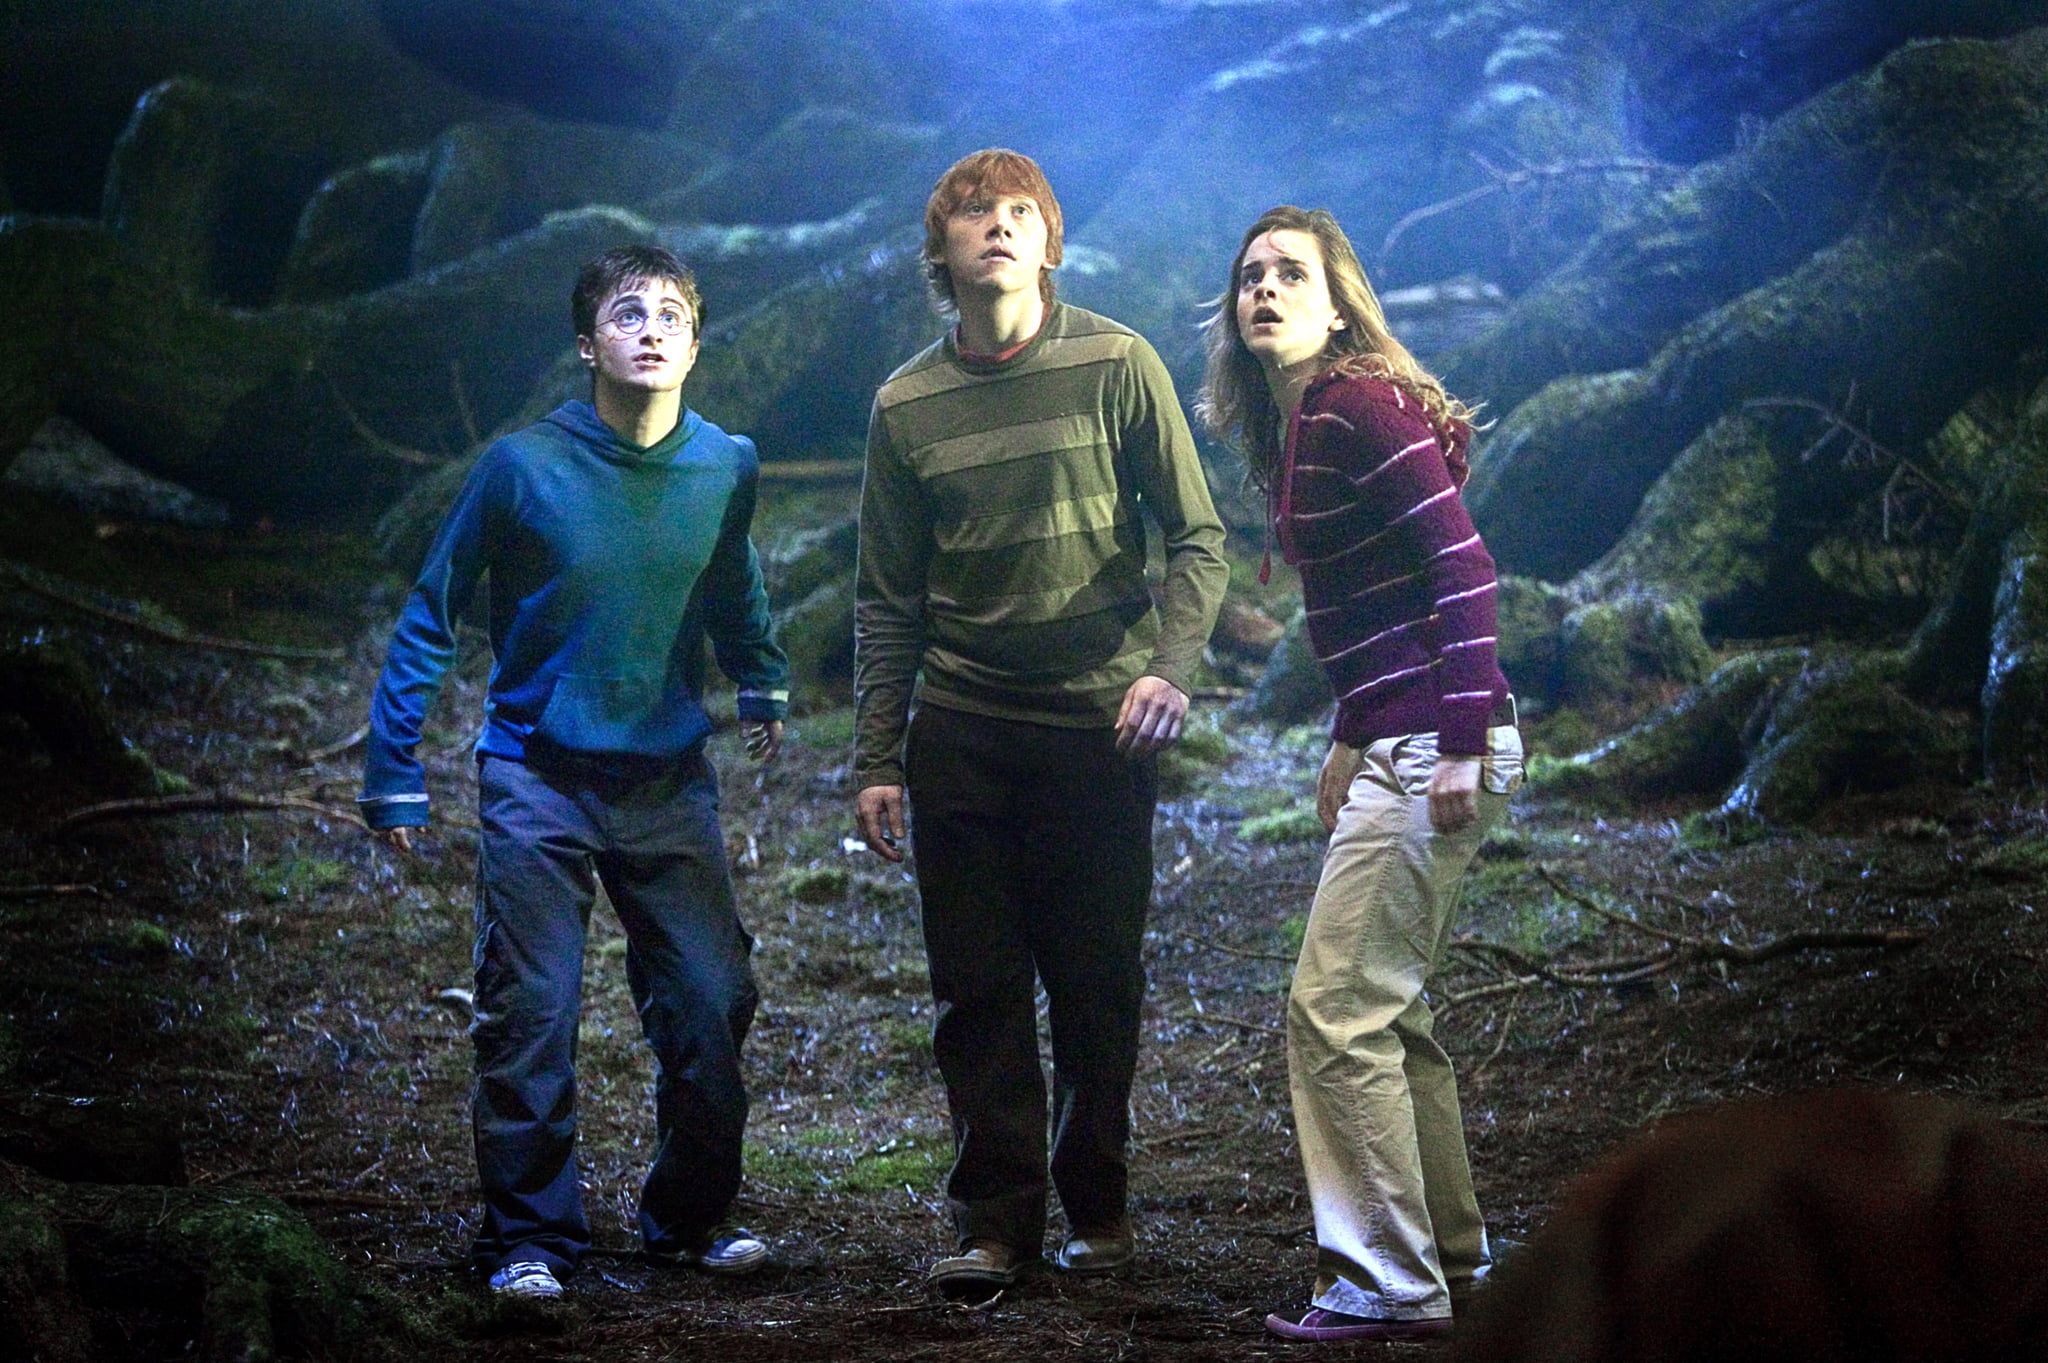 HARRY POTTER AND THE ORDER OF THE PHOENIX, Daniel Radcliffe, Rupert Grint, Emma Watson, 2007. Warner Bros./courtesy Everett Collection